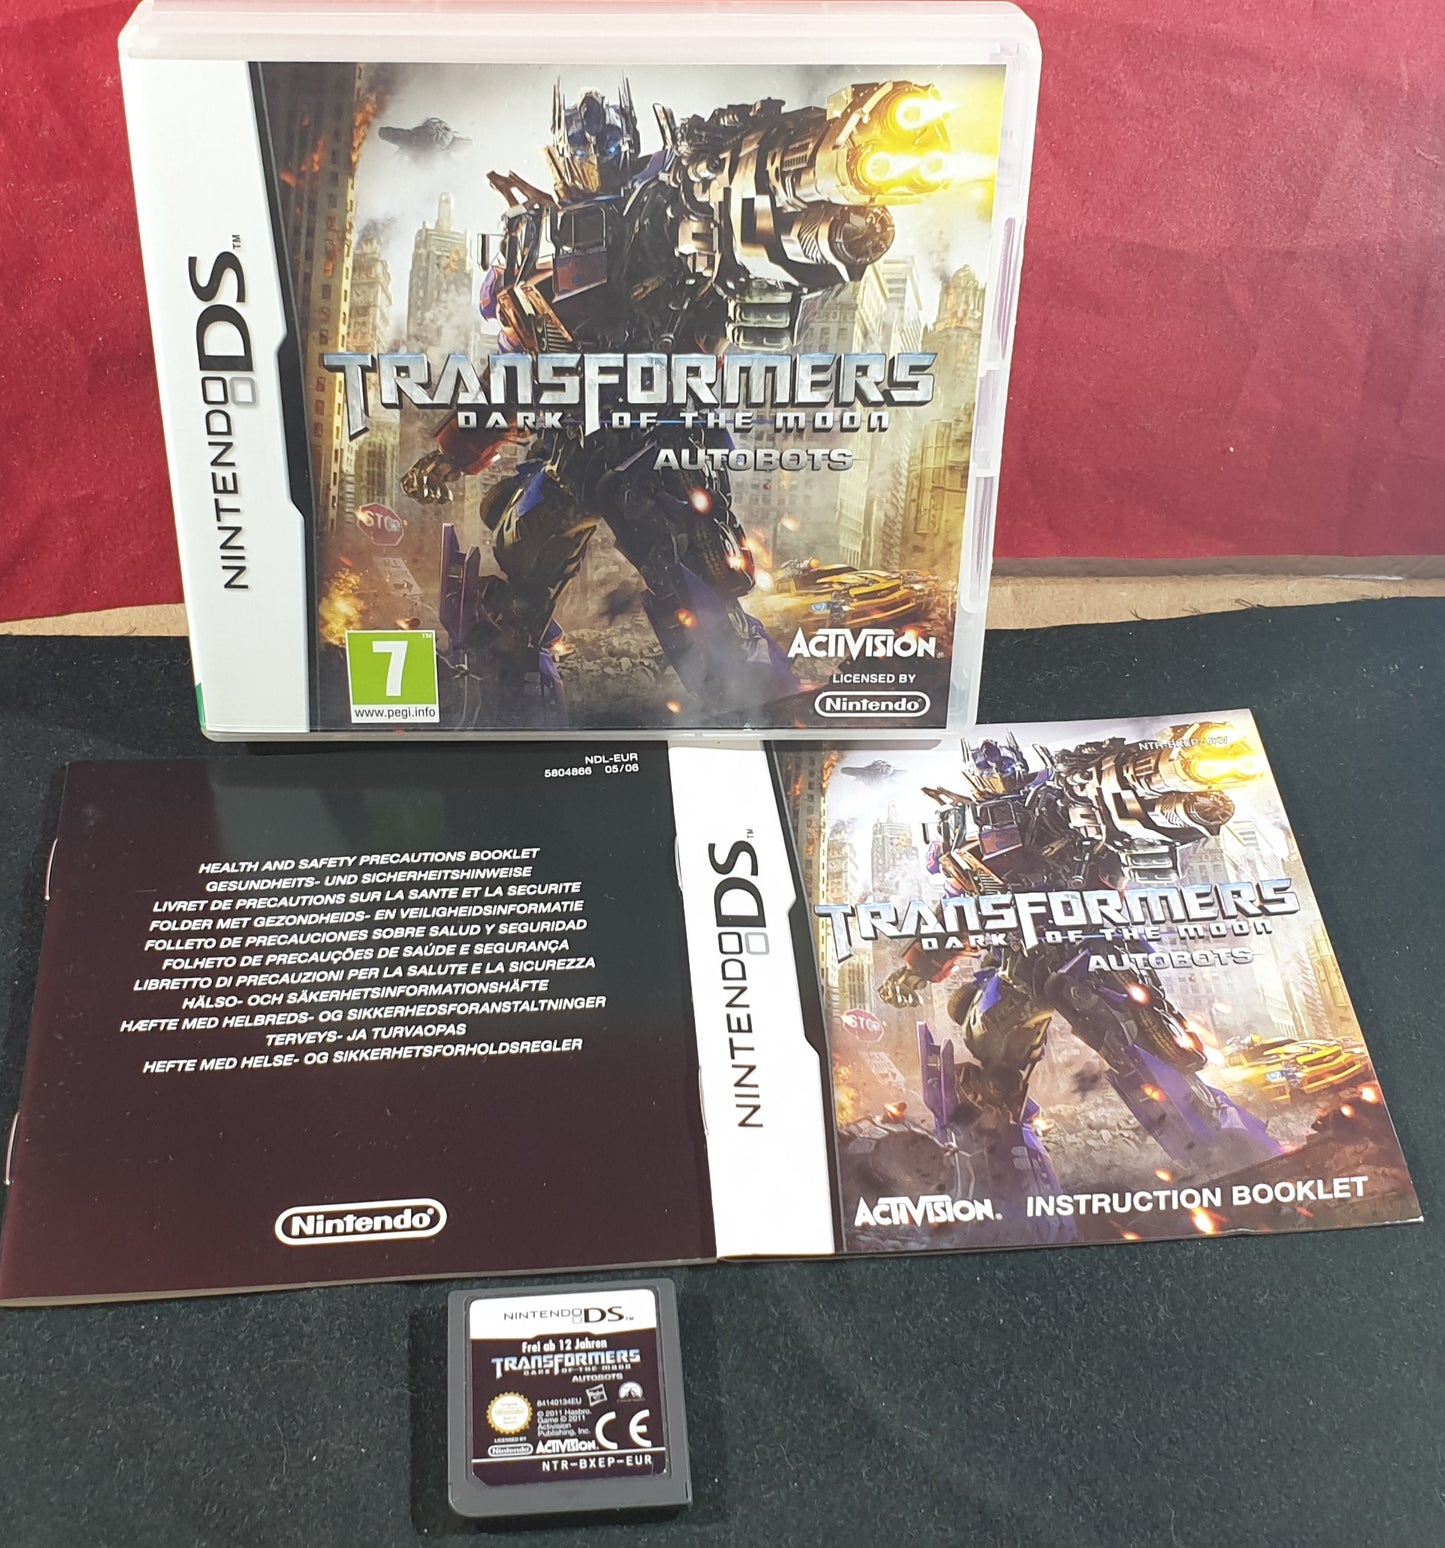 Transformers Dark of the Moon Autobots Nintendo DS Game